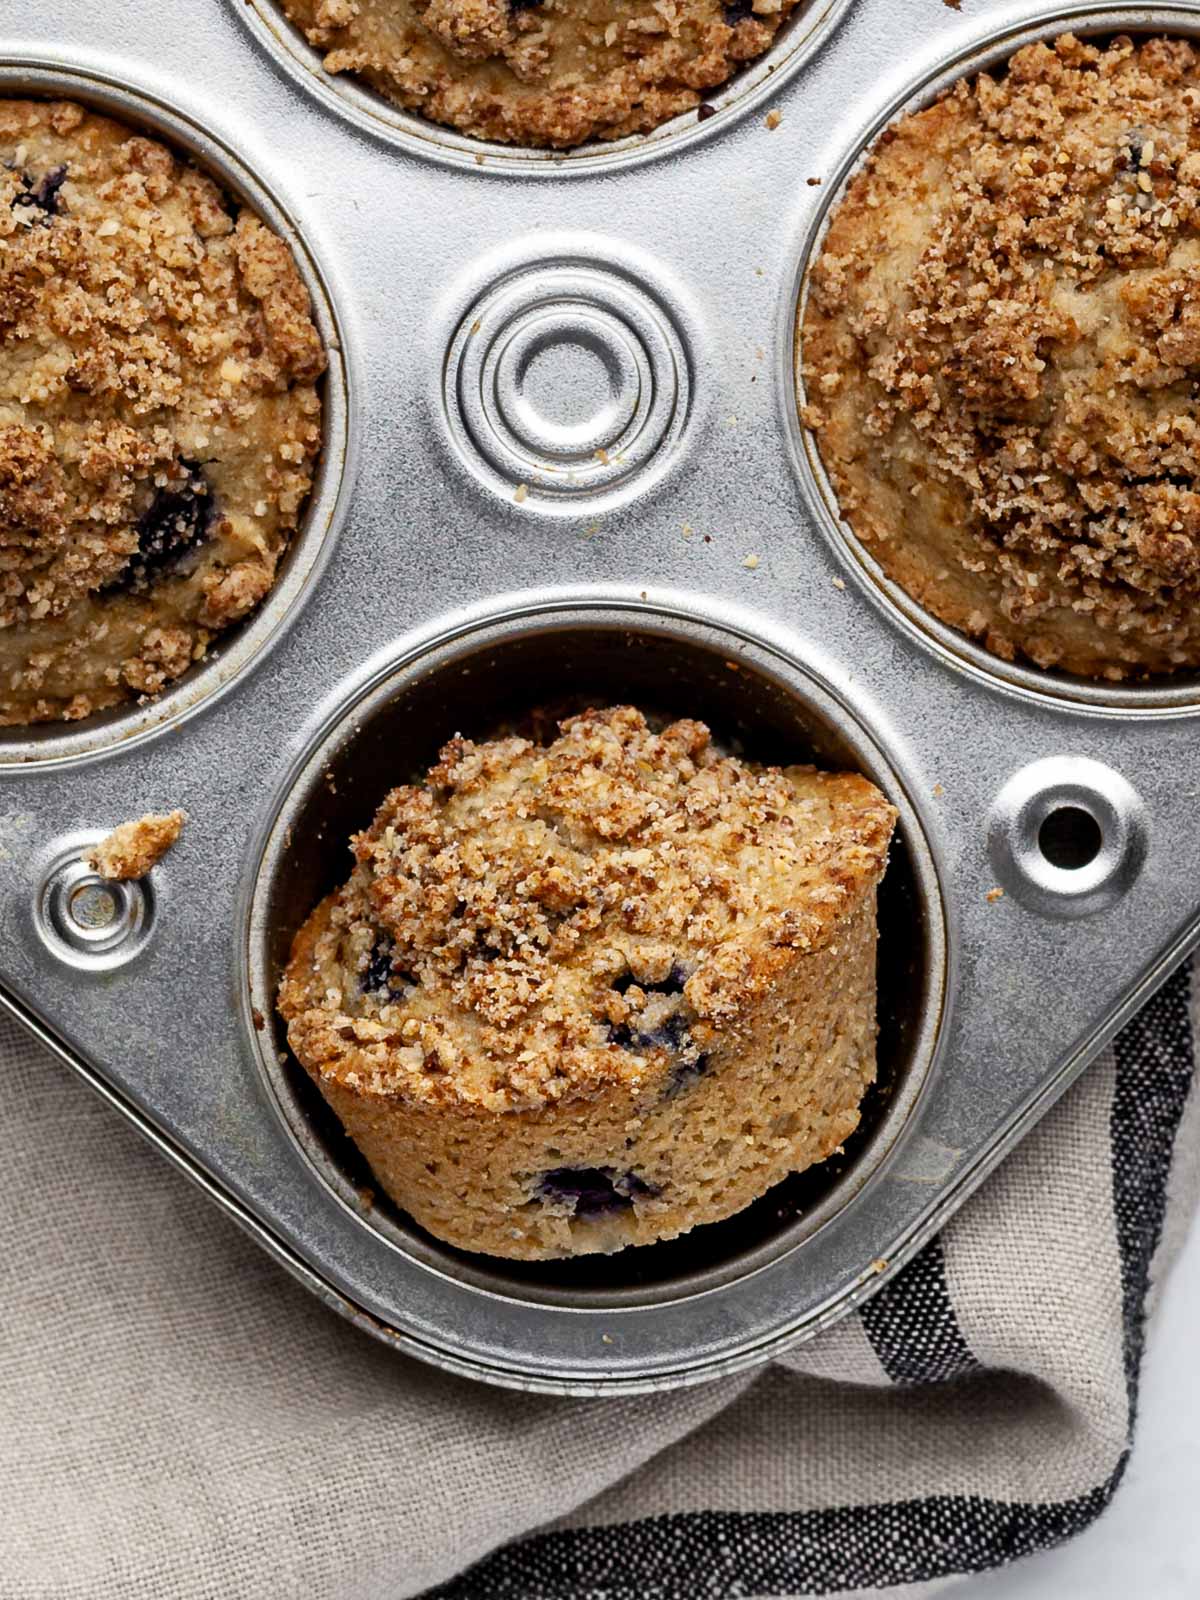 One vegan low-fodmap blueberry muffin on its side in a muffin tin with two muffin tops framing..